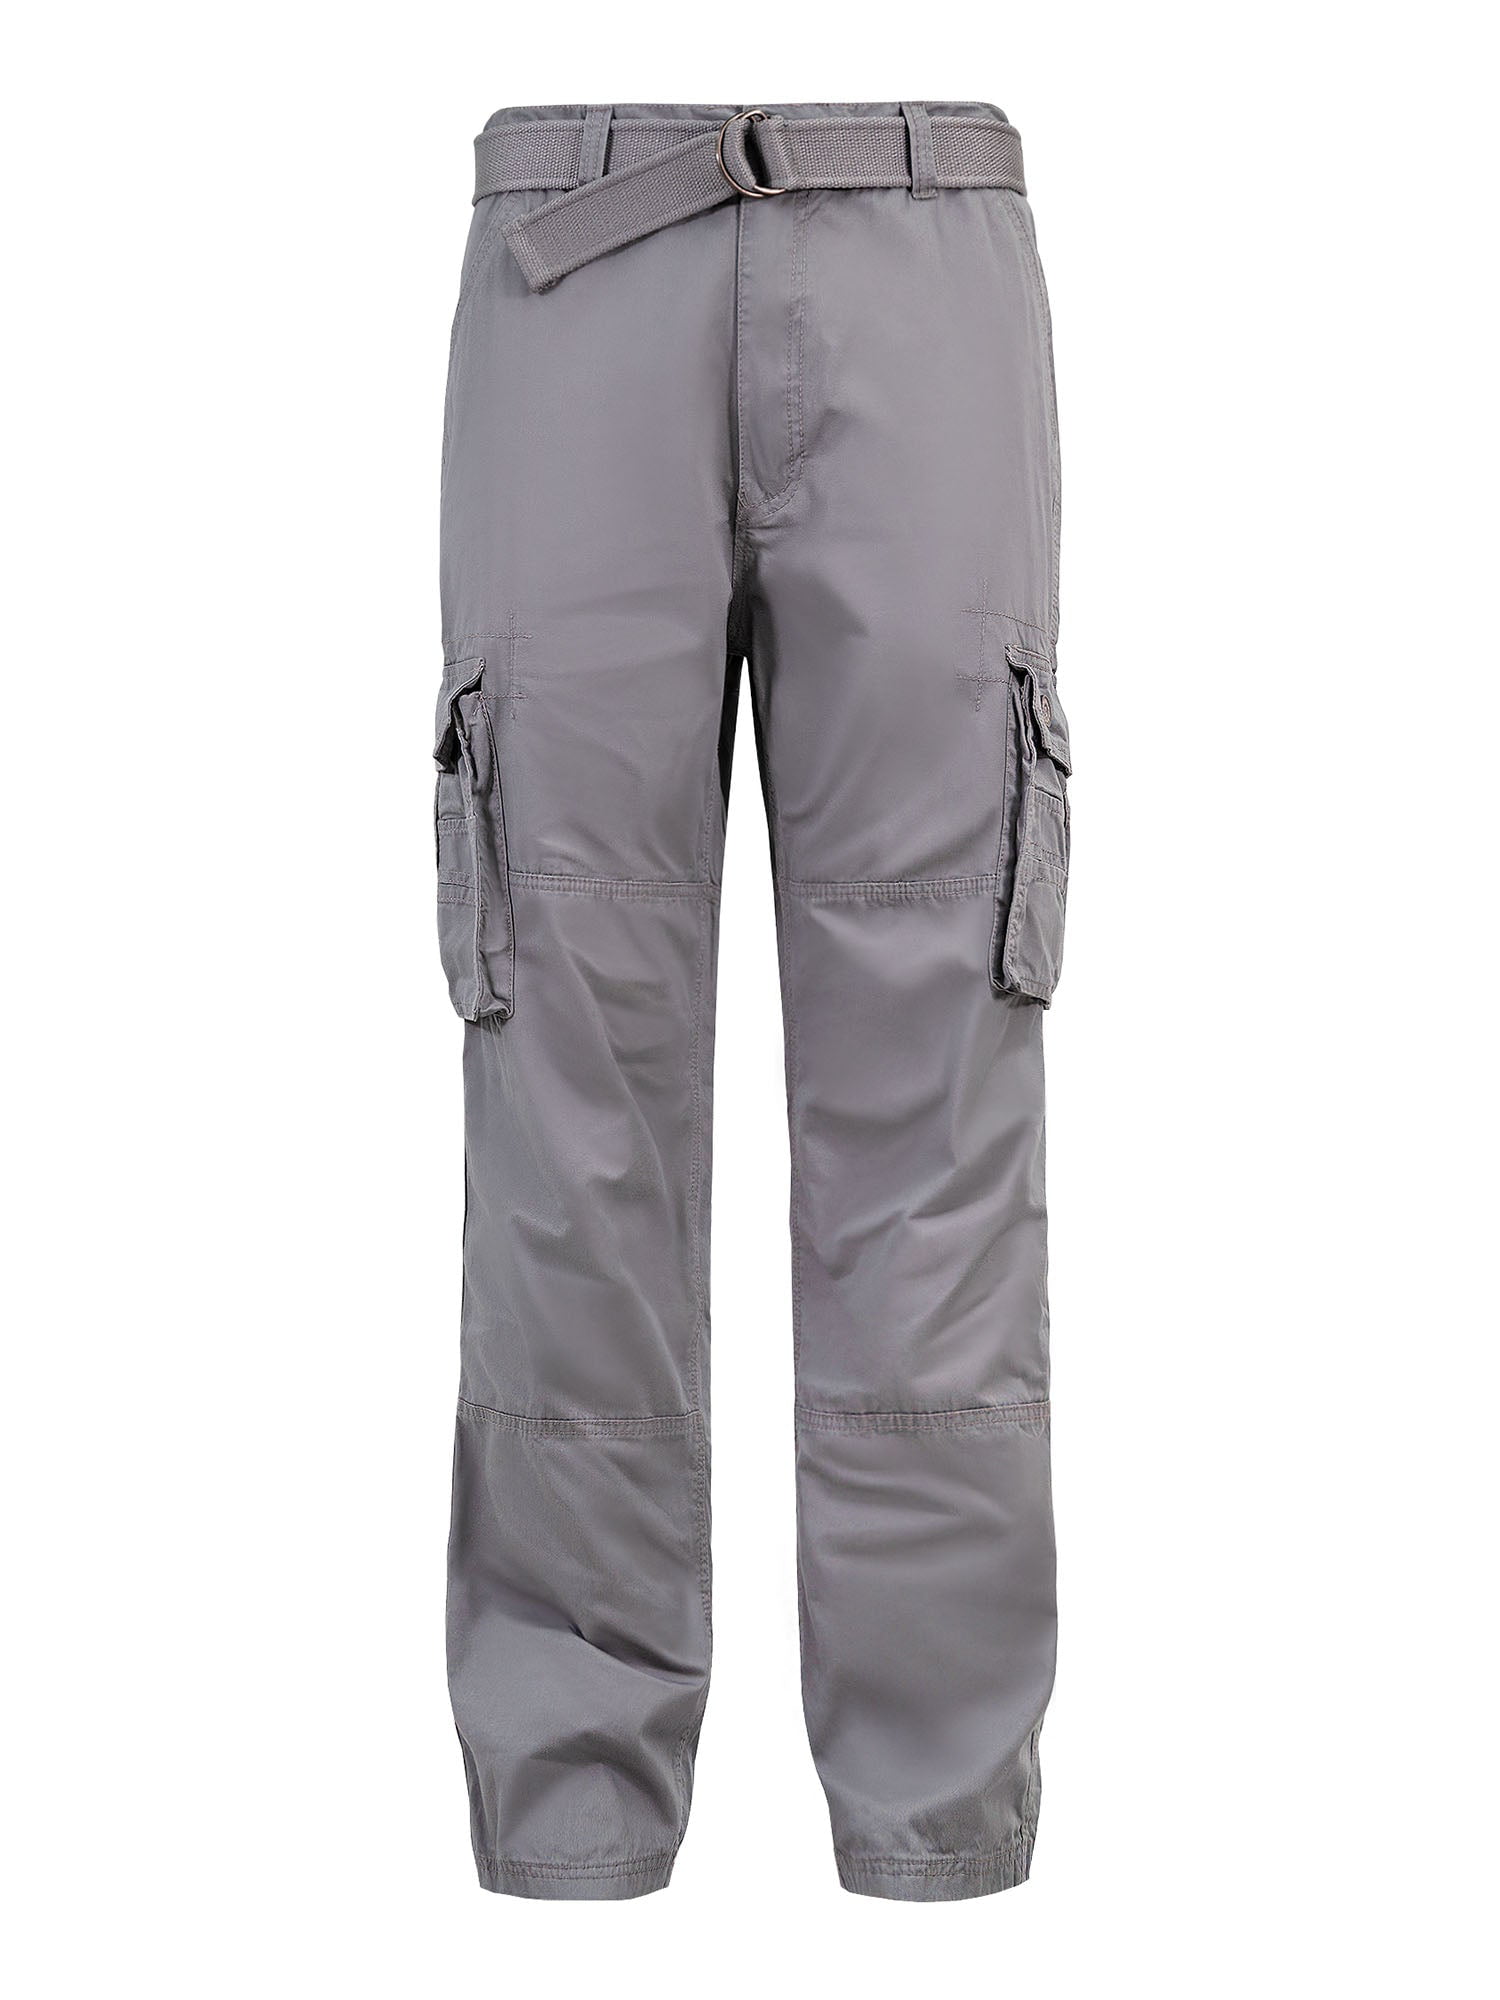 G-Style Men's Essential Enzyme Washed Twill Cargo Pants Grey 34/30 ...